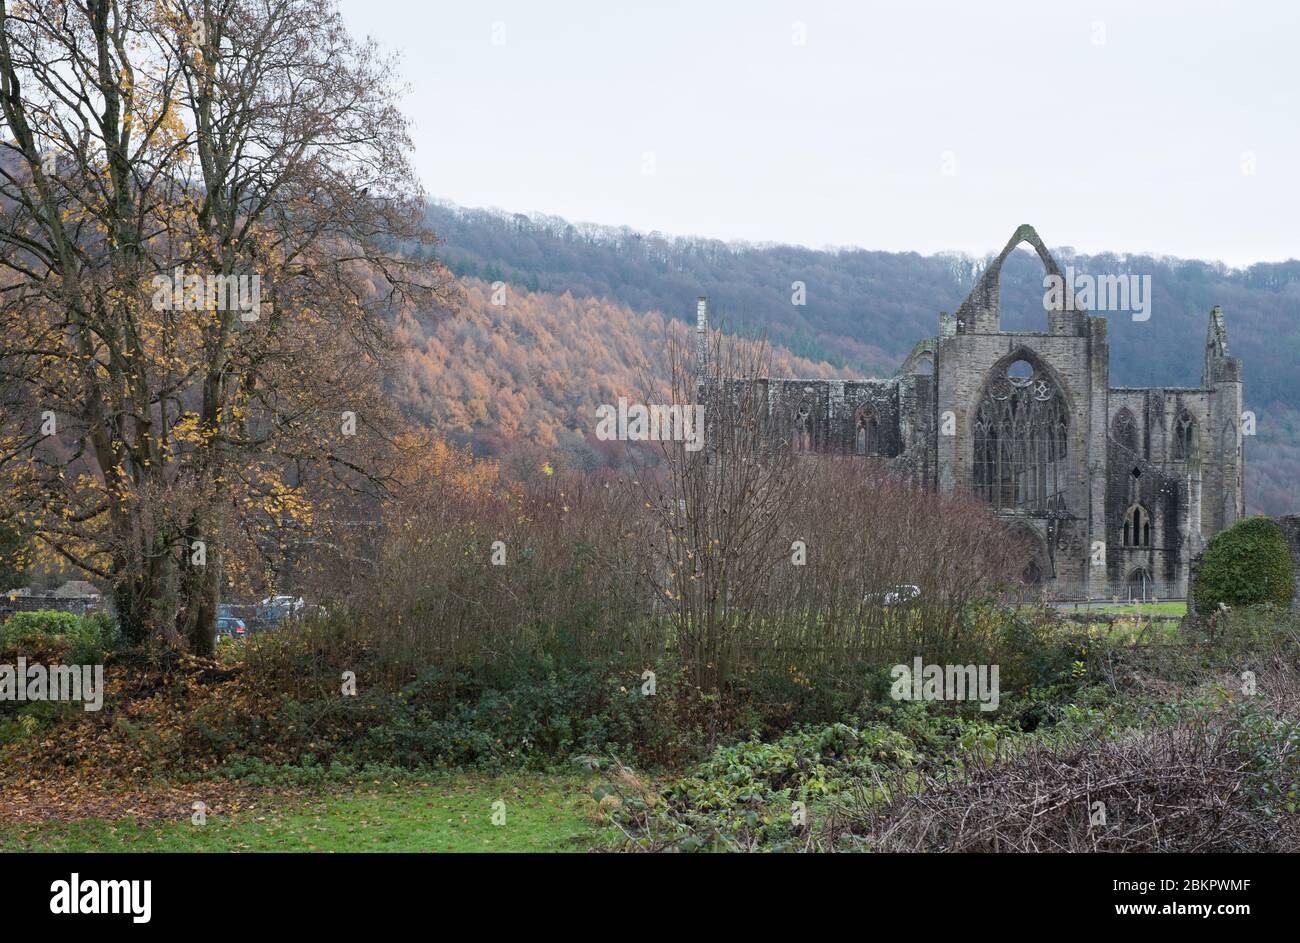 Tintern Abbey in the Wye Valley on the border between England and Wales Stock Photo